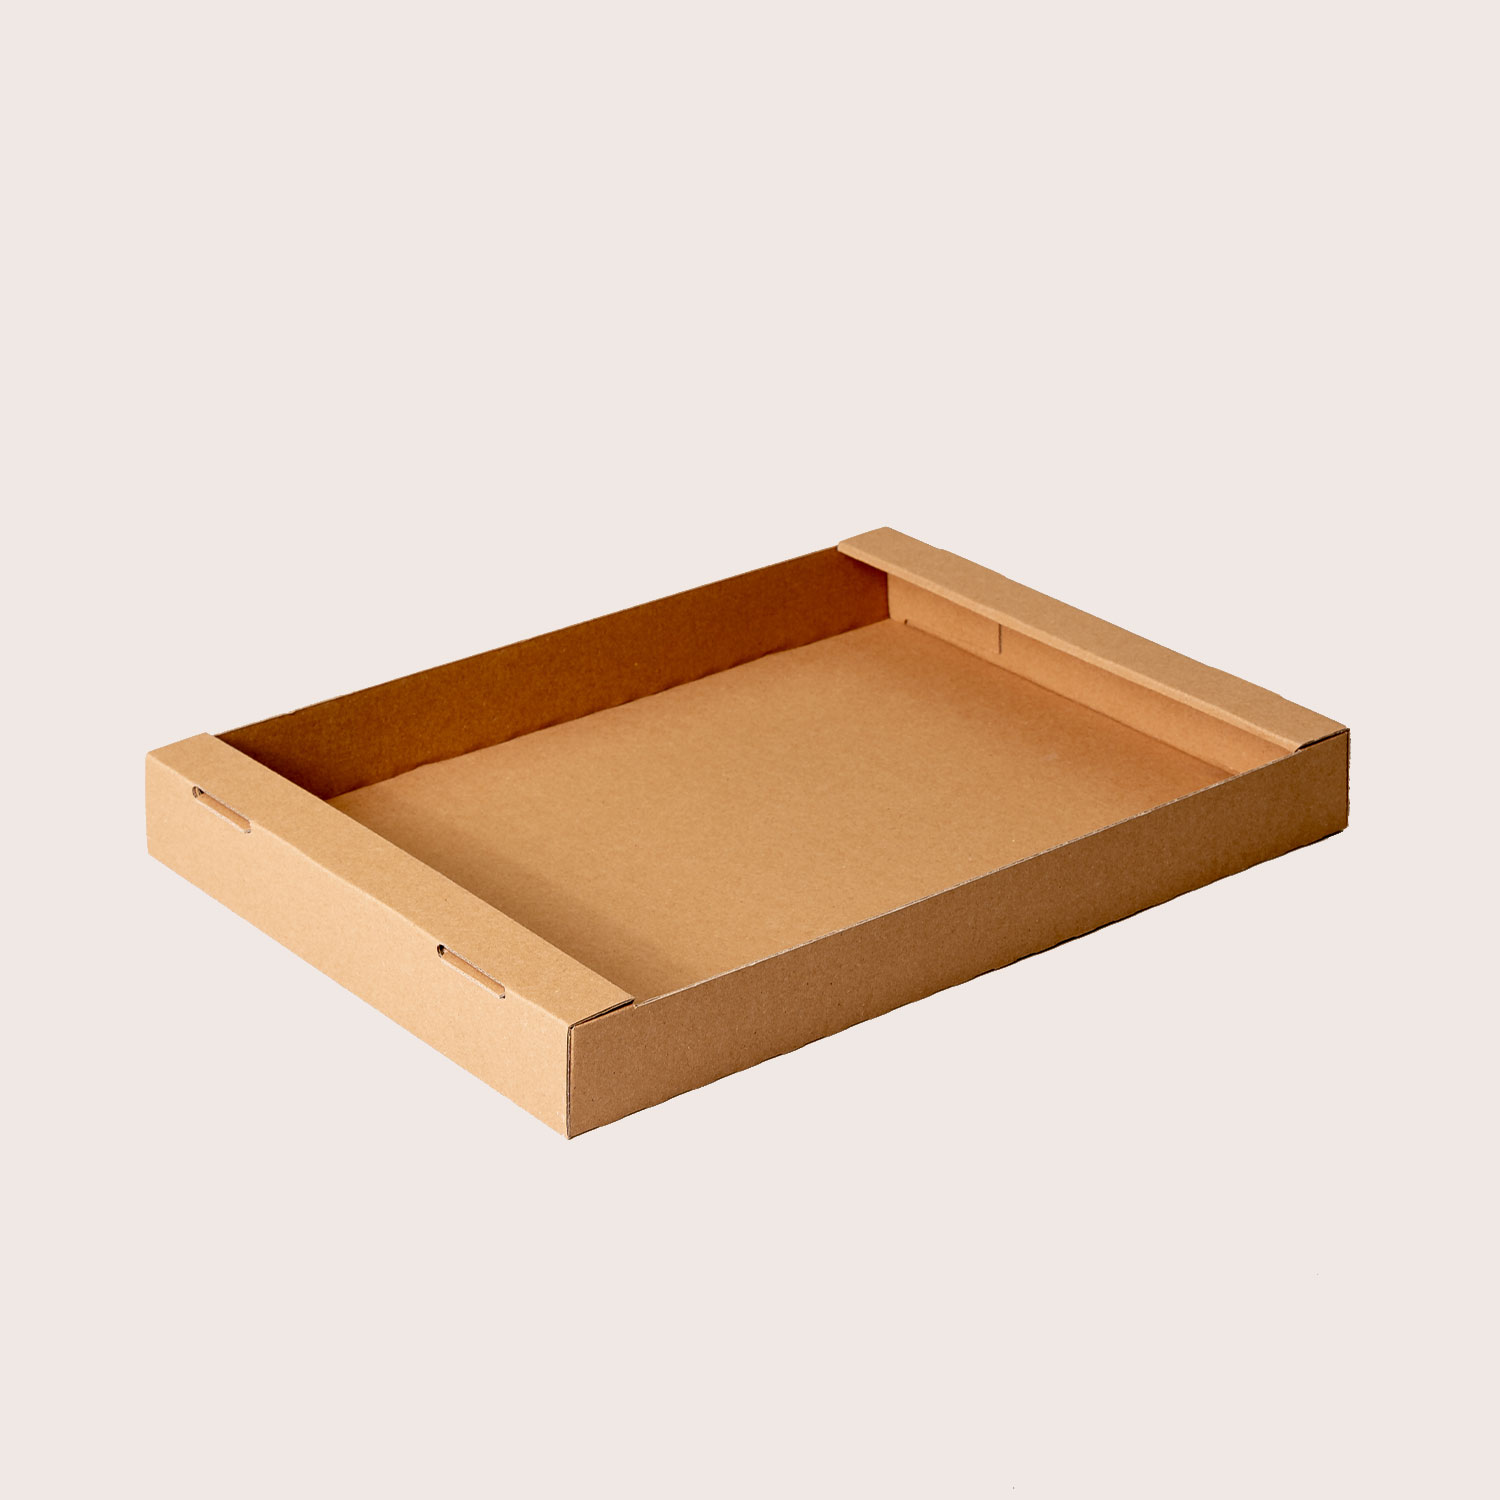 Baking trays from THIMM